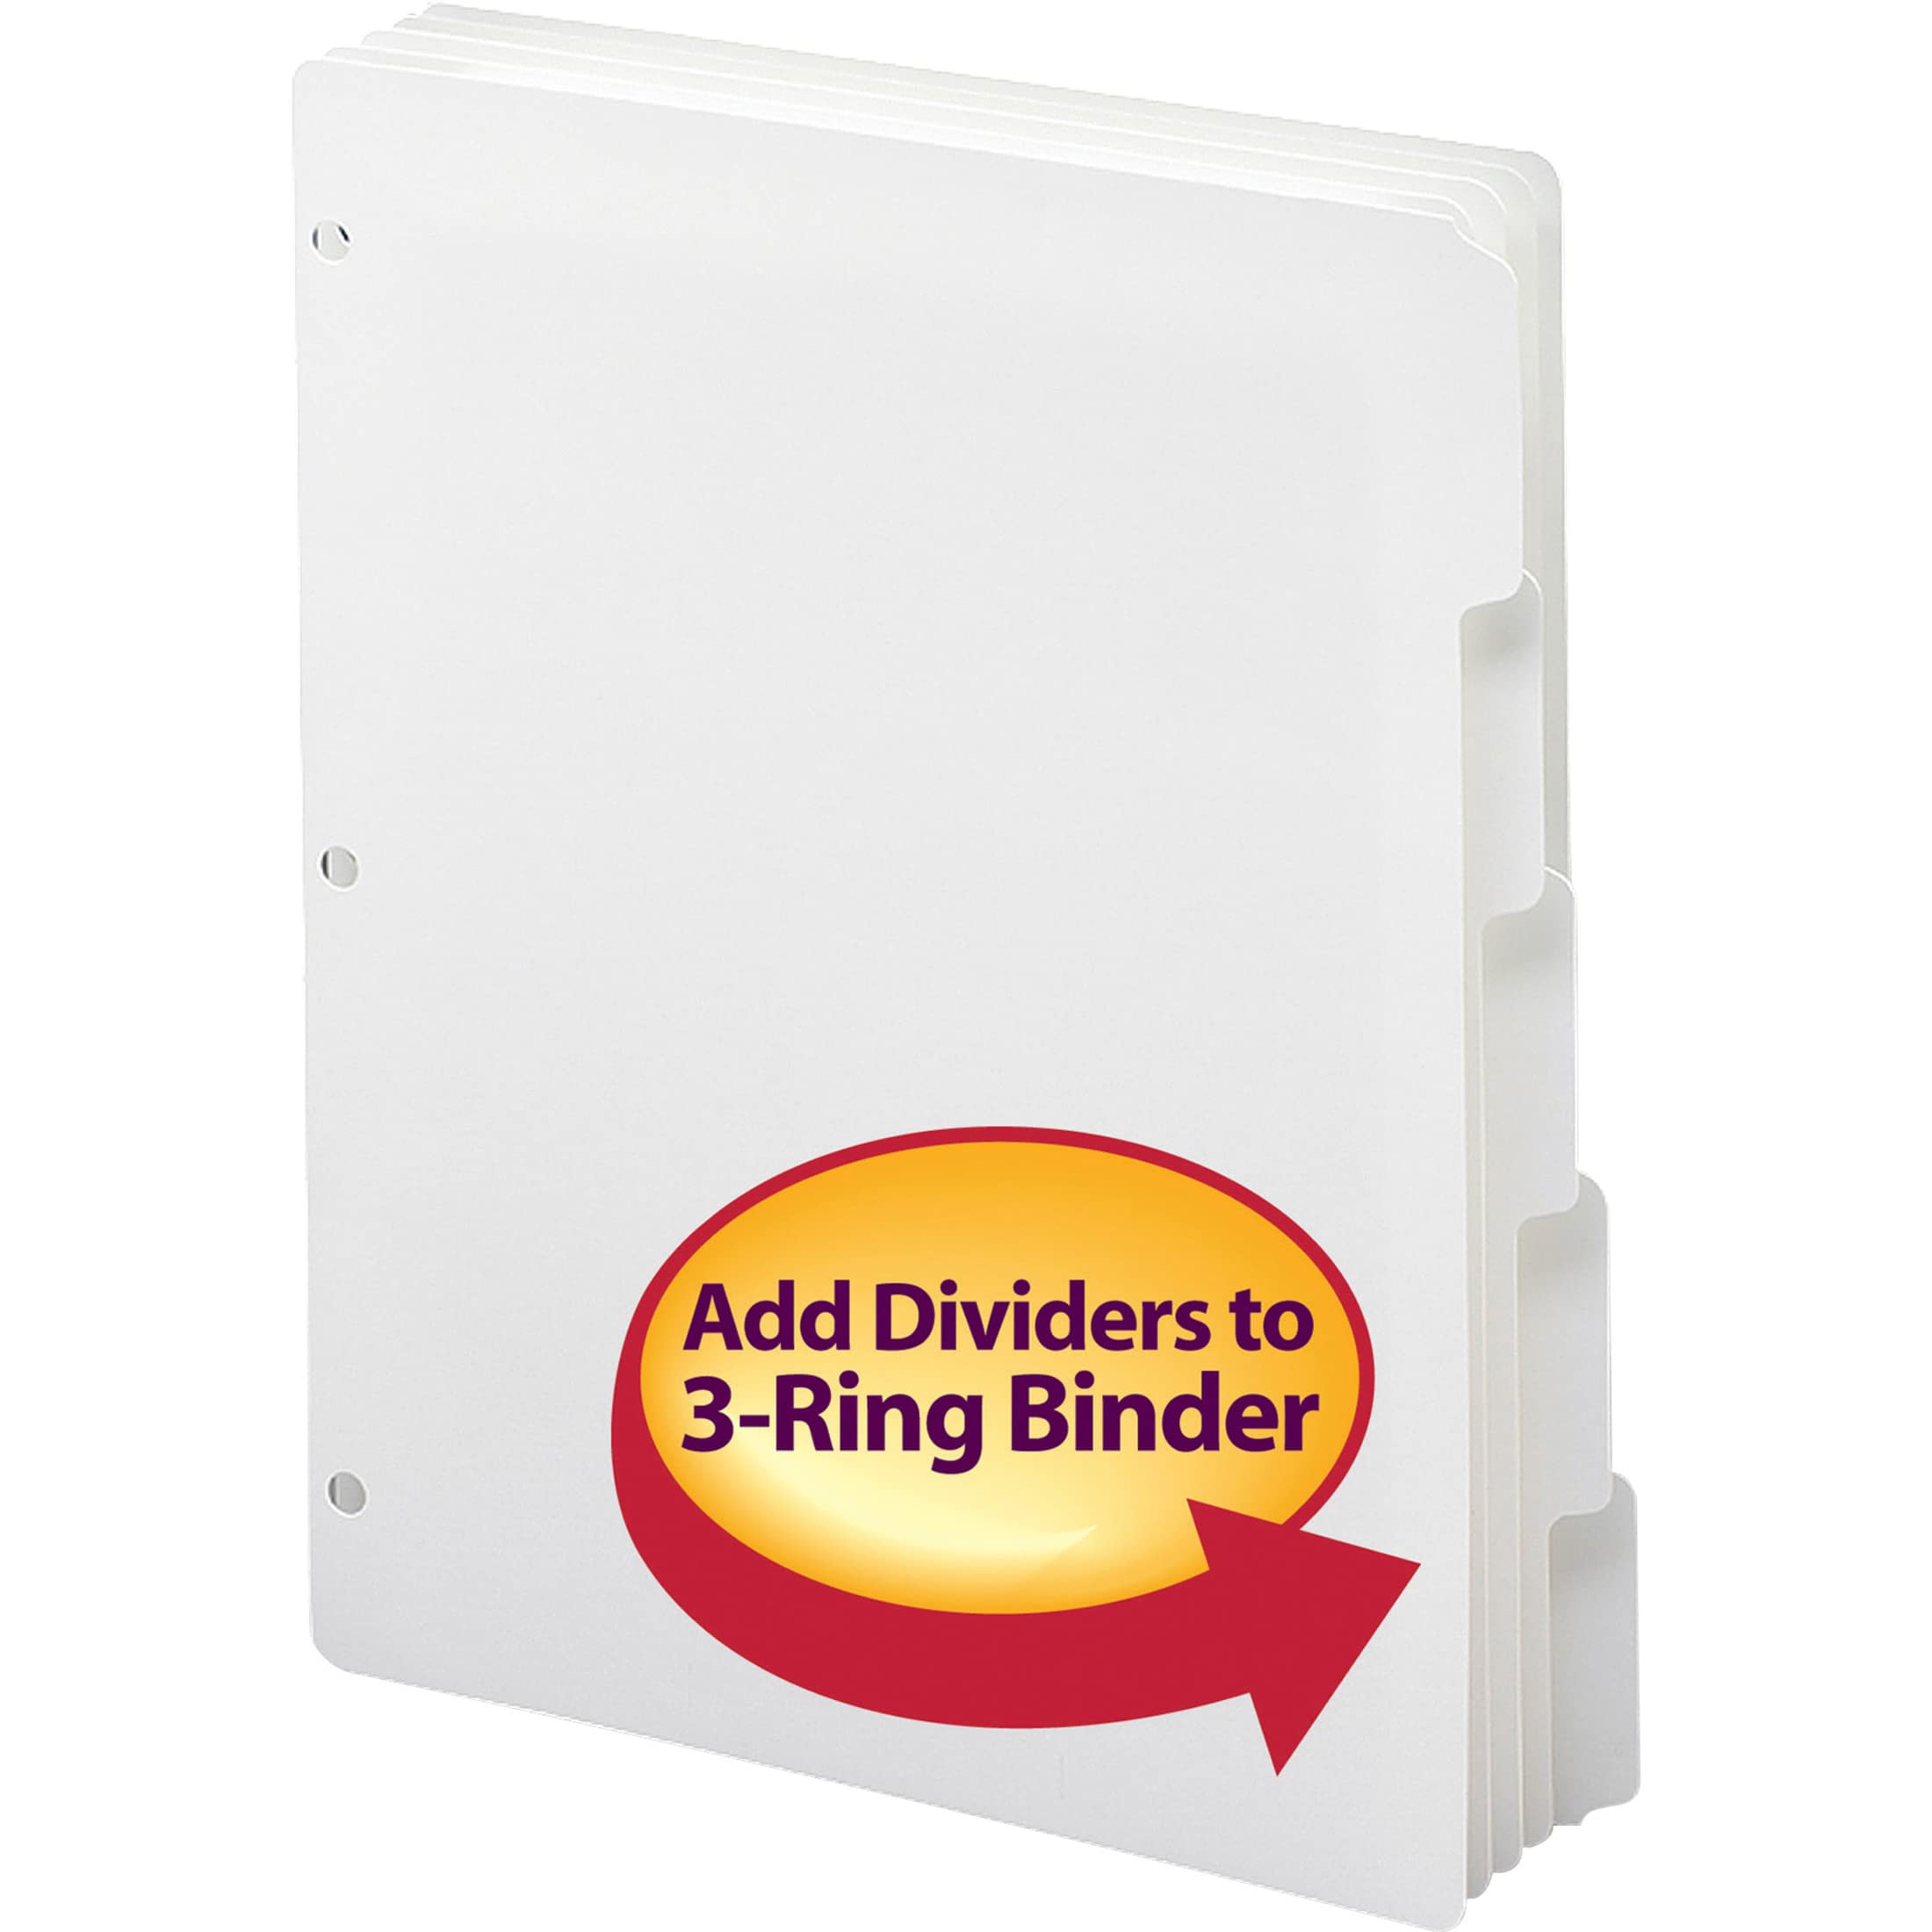 Smead Three-Ring Binder Index Dividers, 1/5-Cut Tabs, Letter Size, White, 100 Dividers (89415)